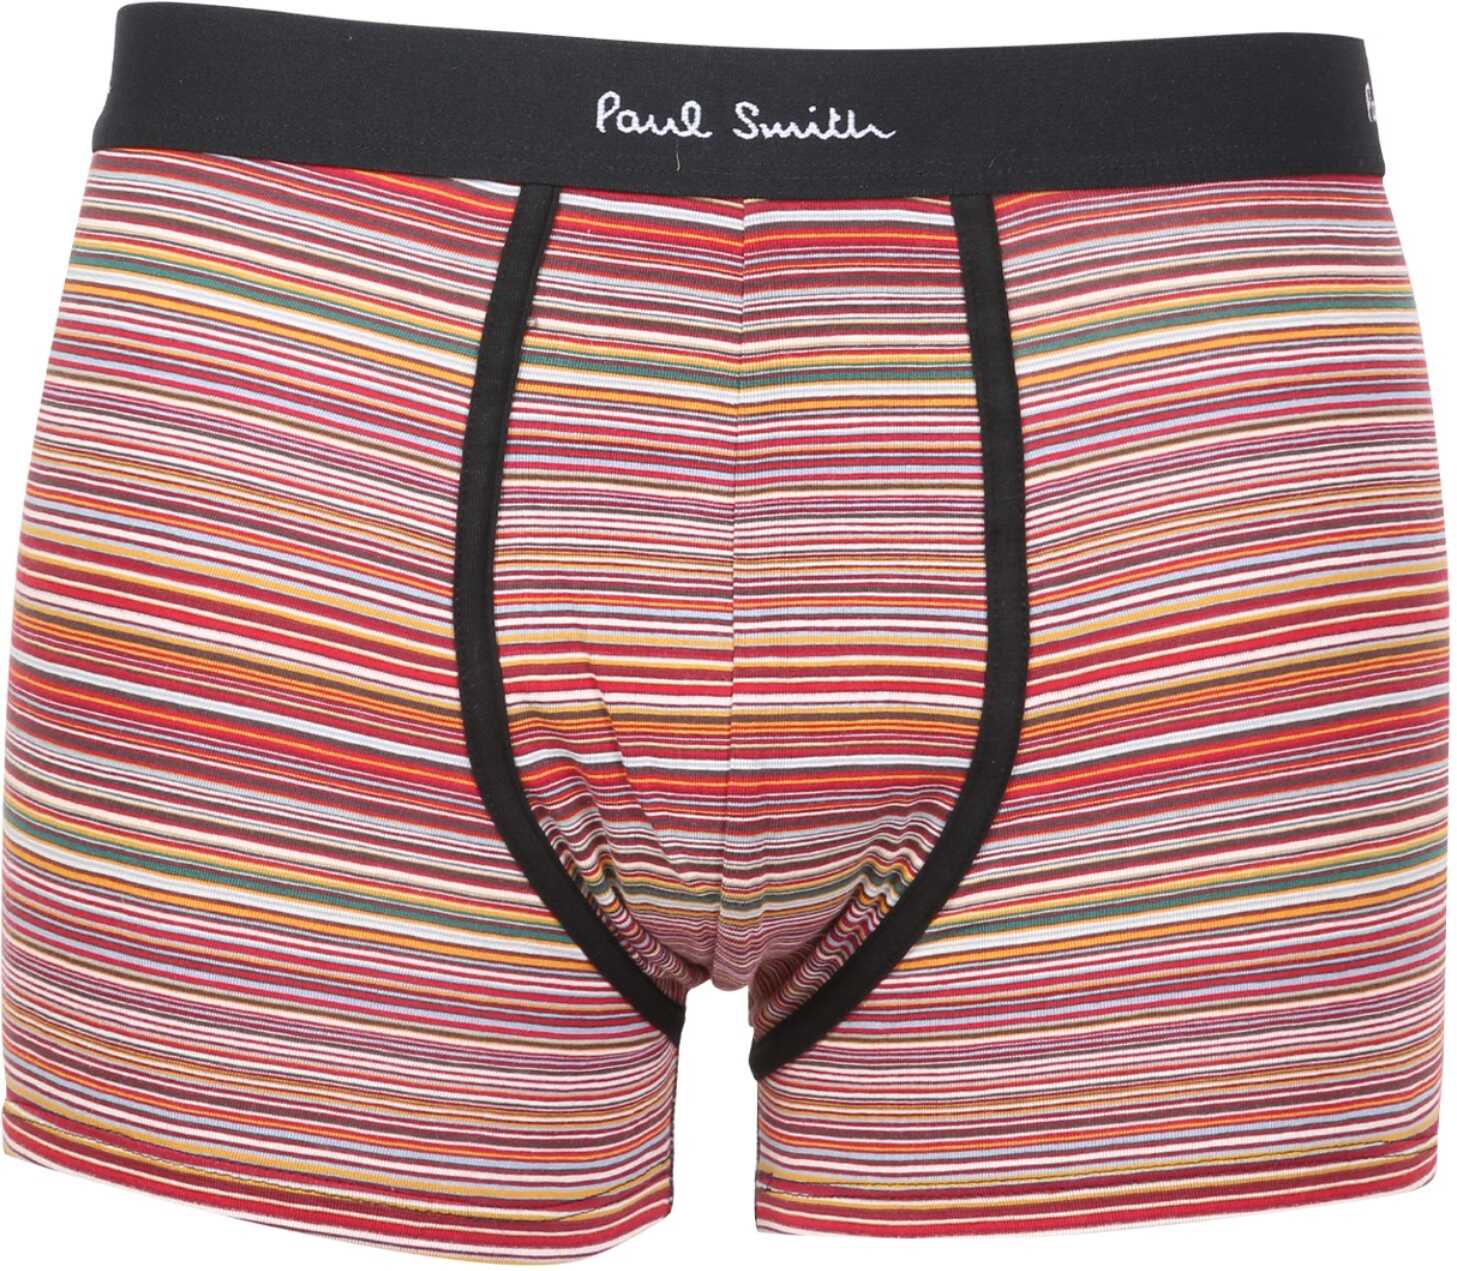 Paul Smith Pack Of Three Boxers M1A/914C/A3PCKP_1A MULTICOLOUR